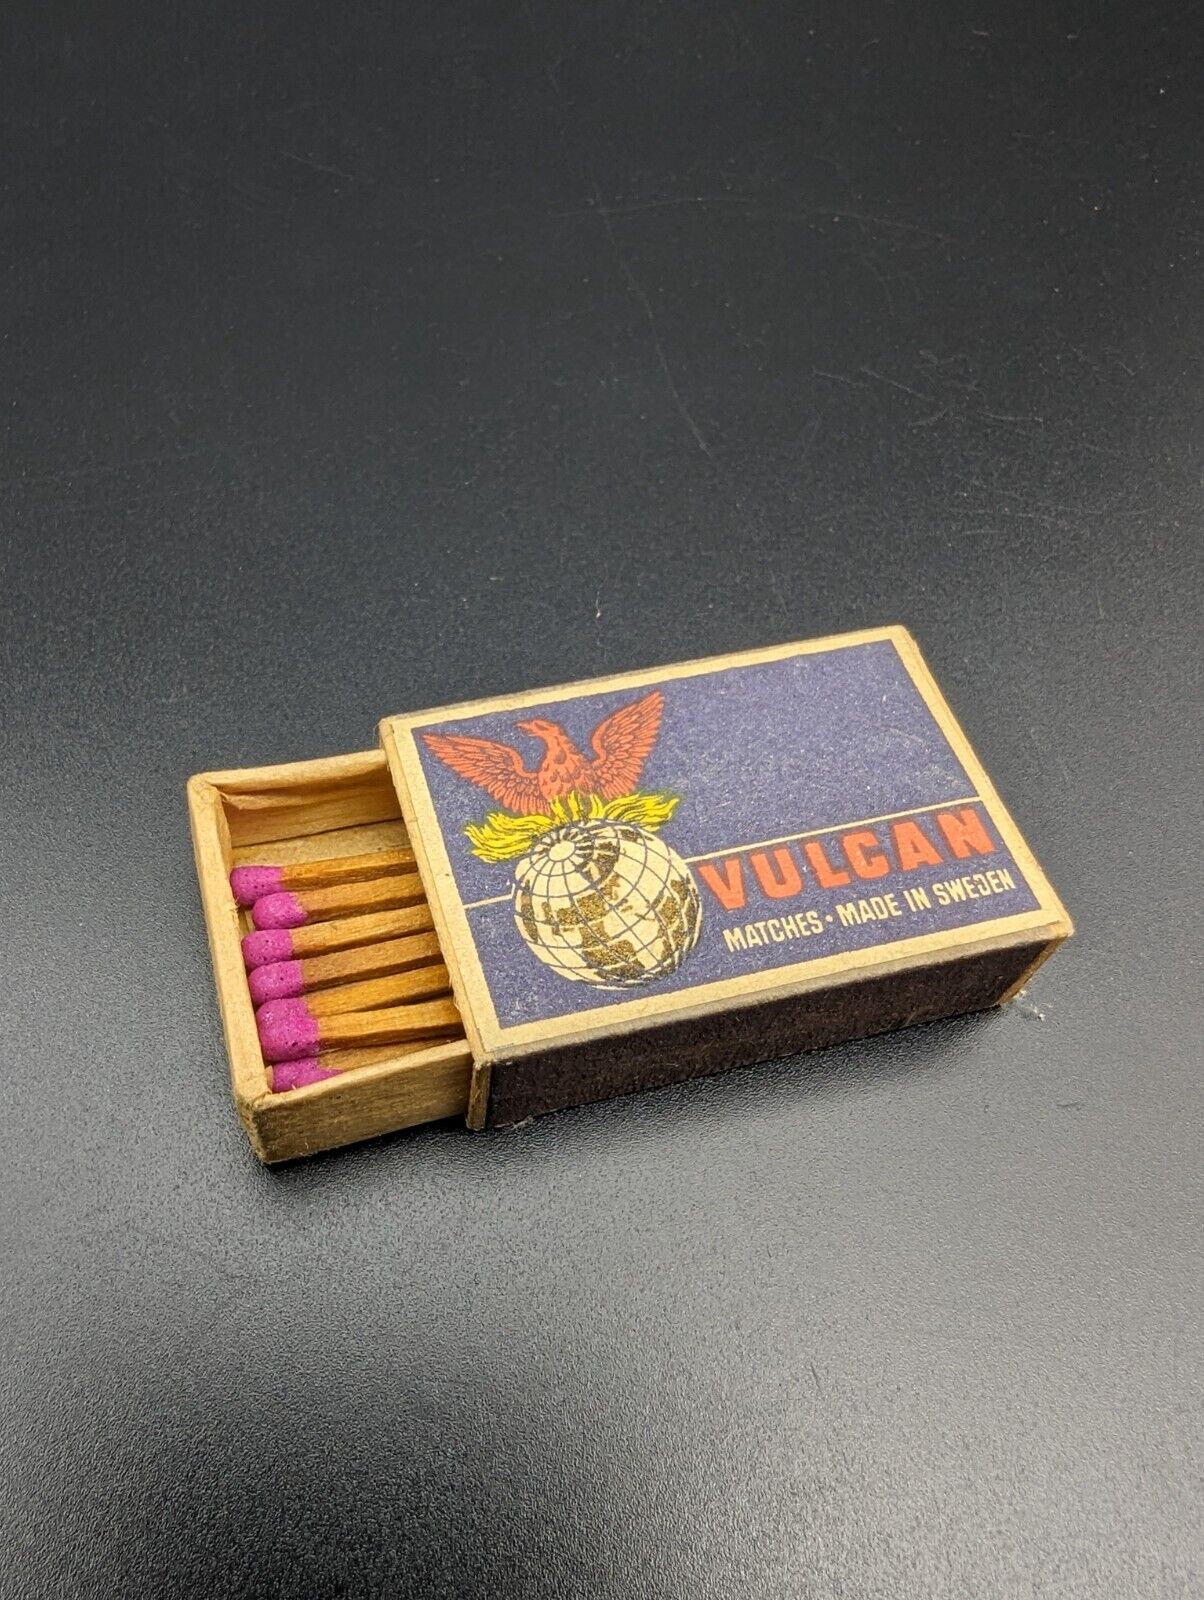 Vintage Vulcan Vest Pocket Safety Matches in Wooden Box Some Used Made in Sweden